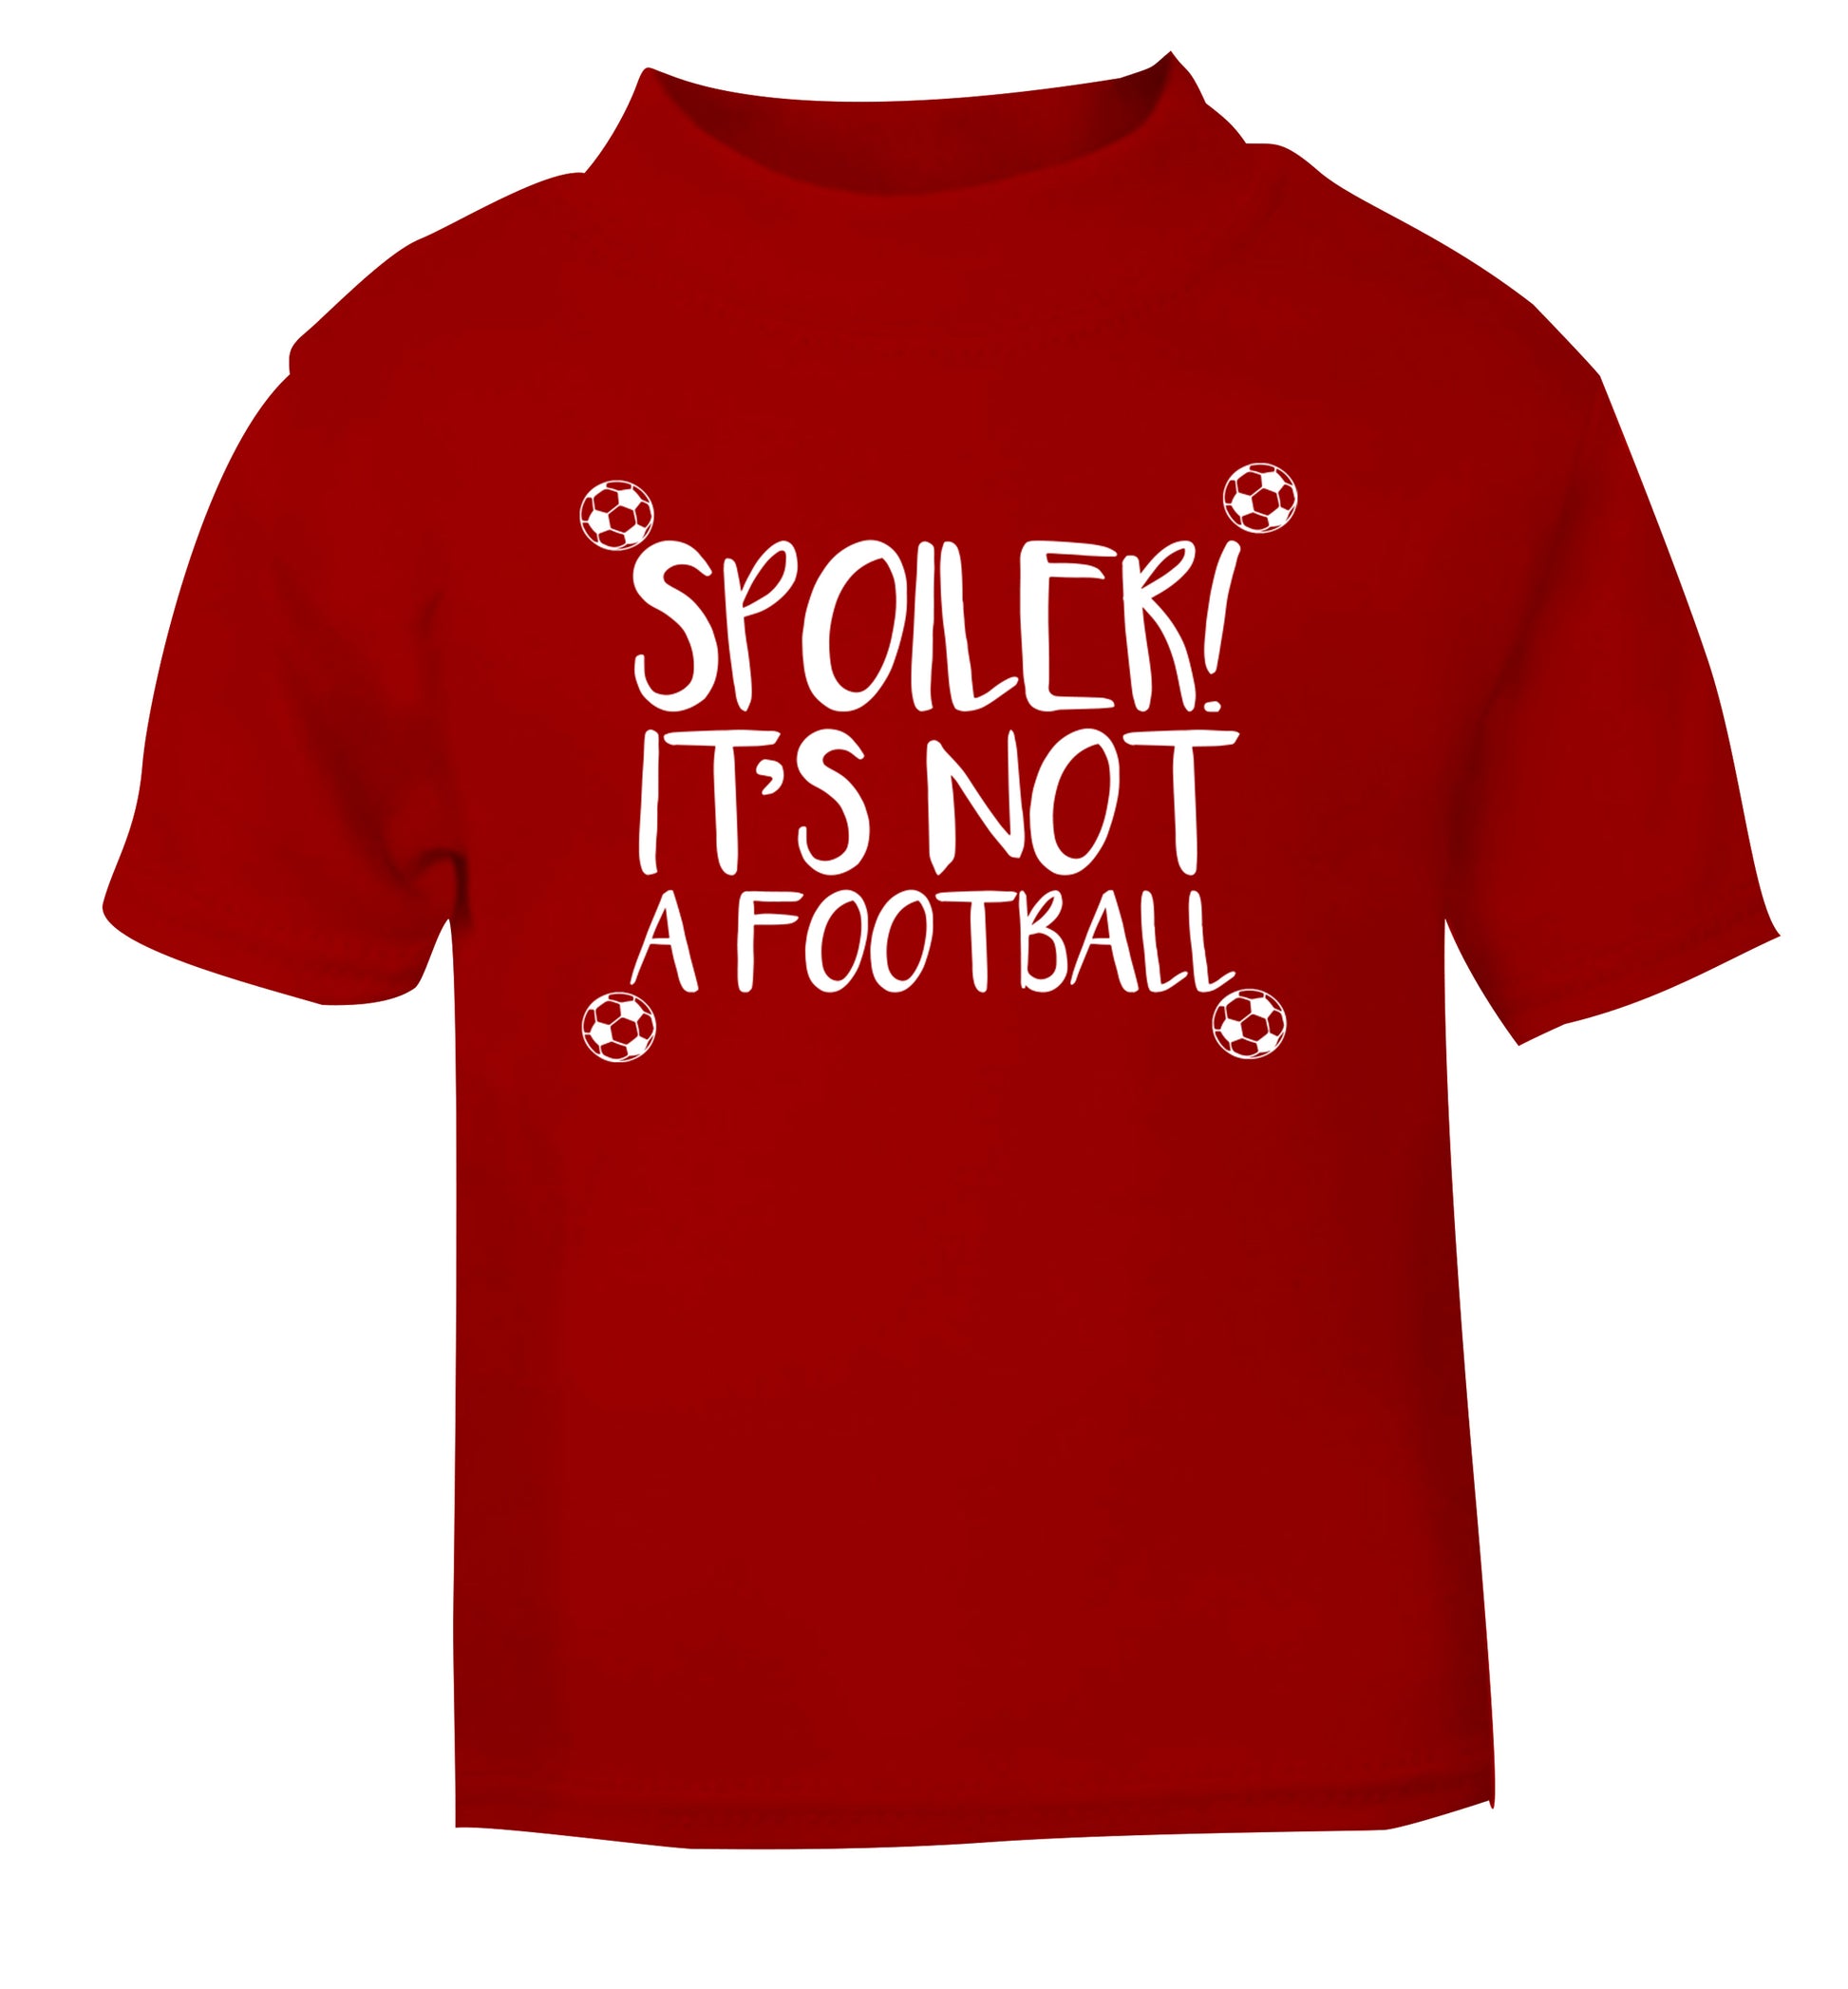 Spoiler it's not a football red Baby Toddler Tshirt 2 Years